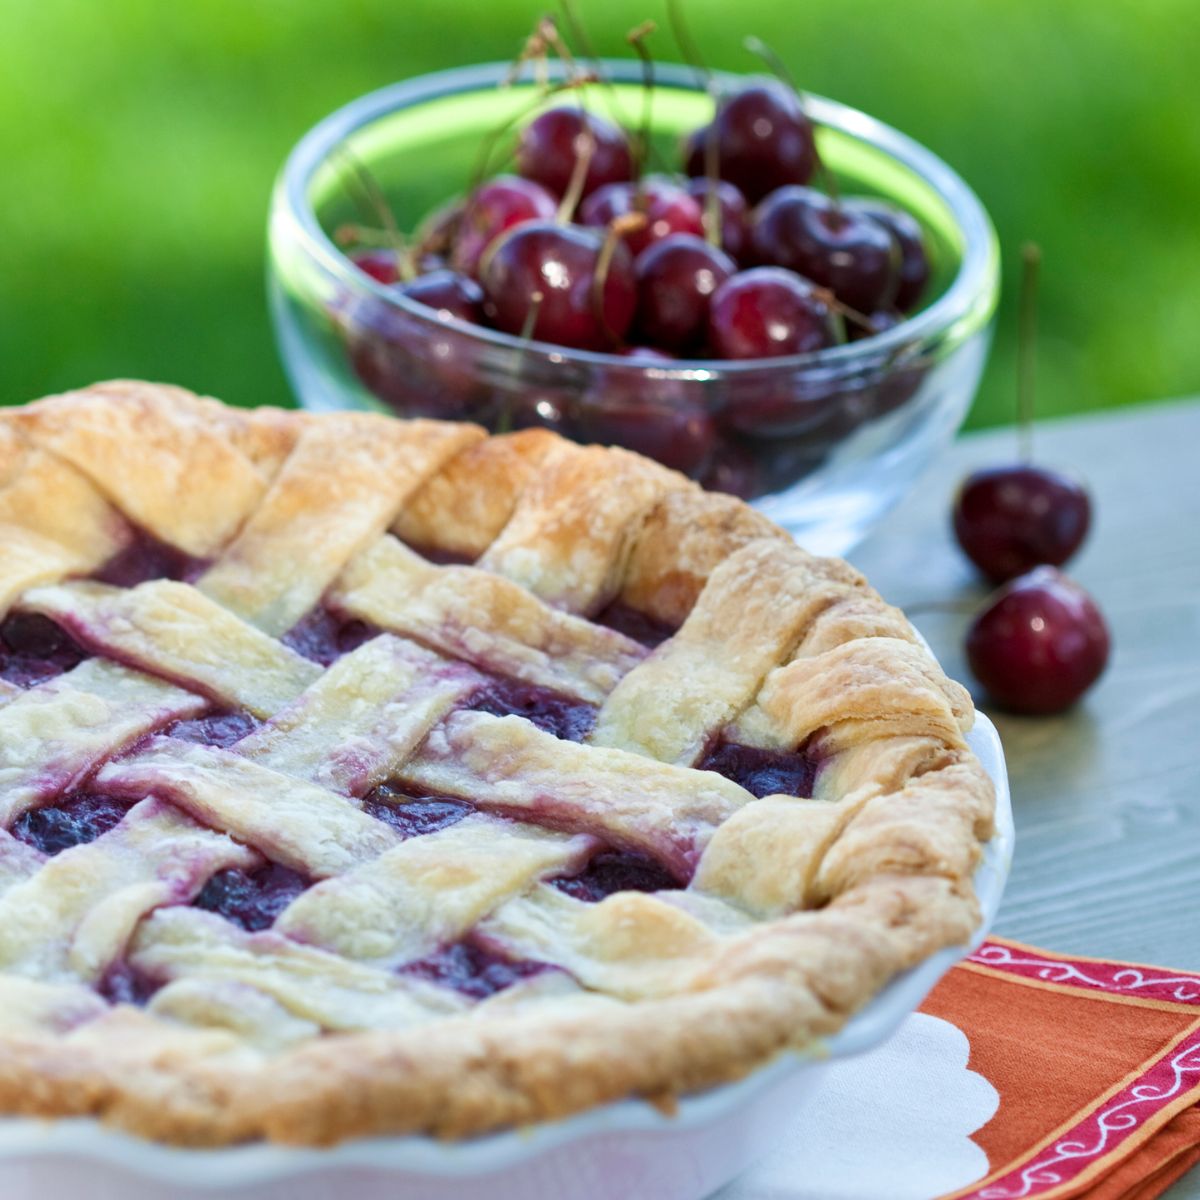 Square image of a cherry pie with cherries in the background.